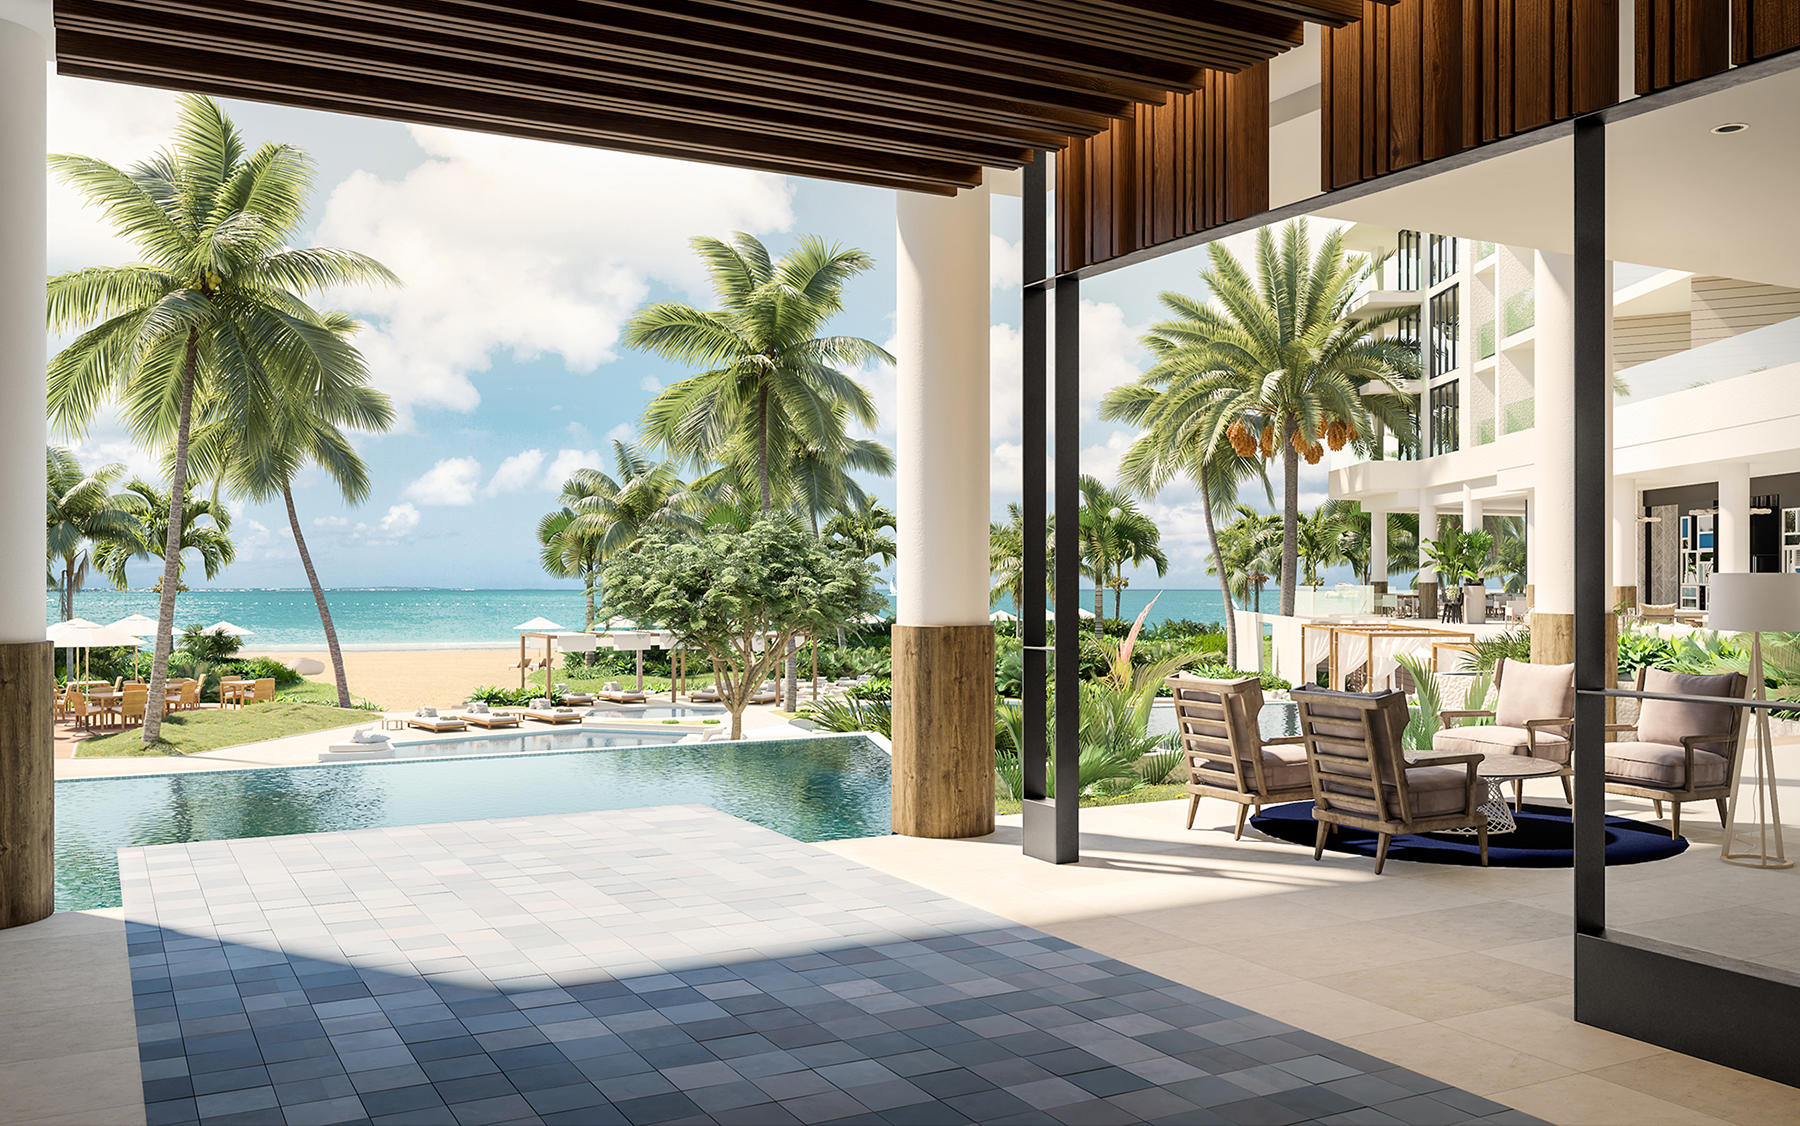 Andaz Residences Grace Bay Turks and Caicos